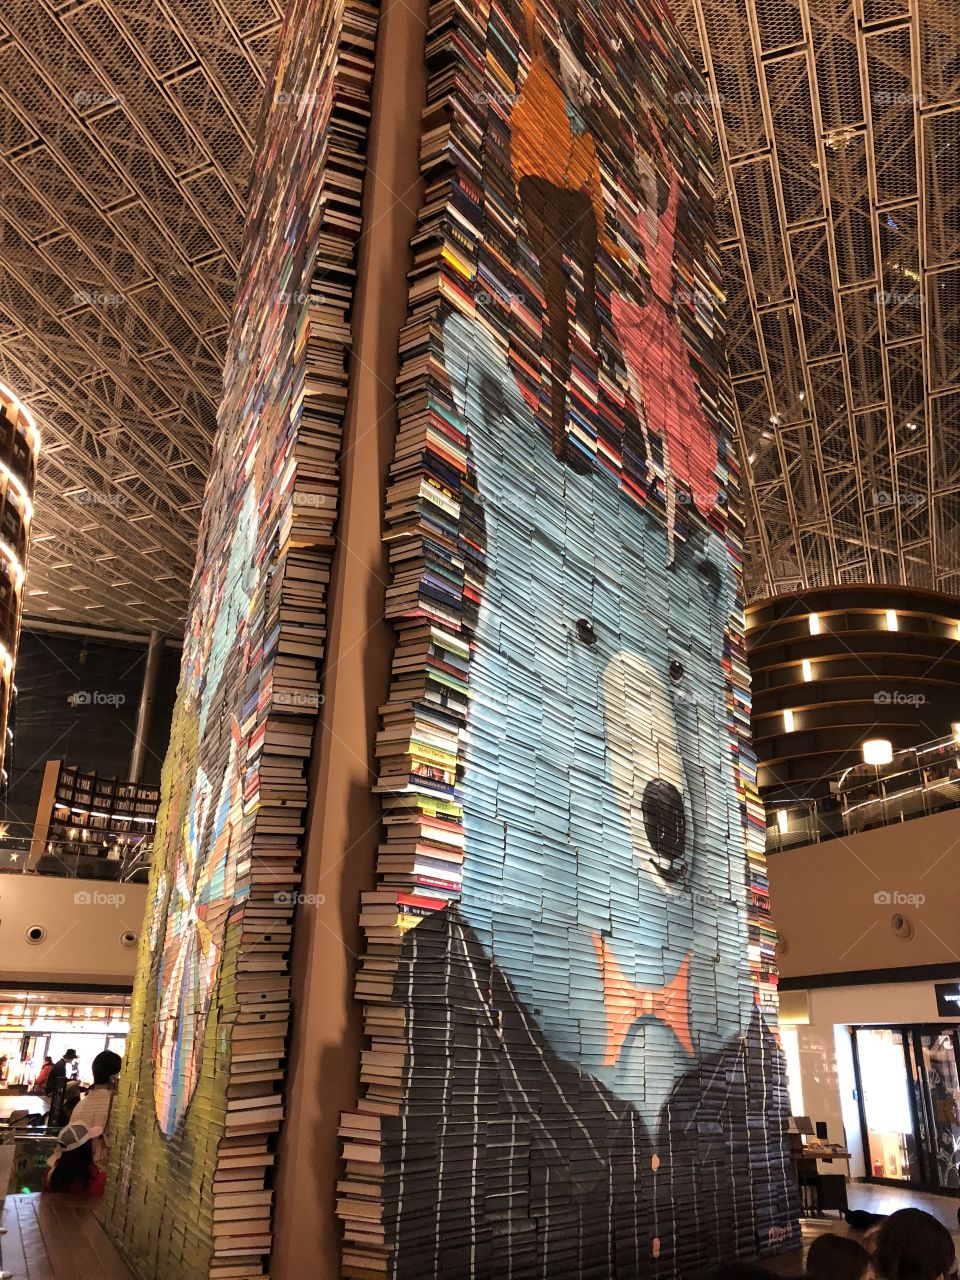 Stunning Library art in Coex, at the heart of the always exciting Gangnam neighborhood in Seoul, South Korea. An always much-needed quiet respite in an otherwise bustling city. 